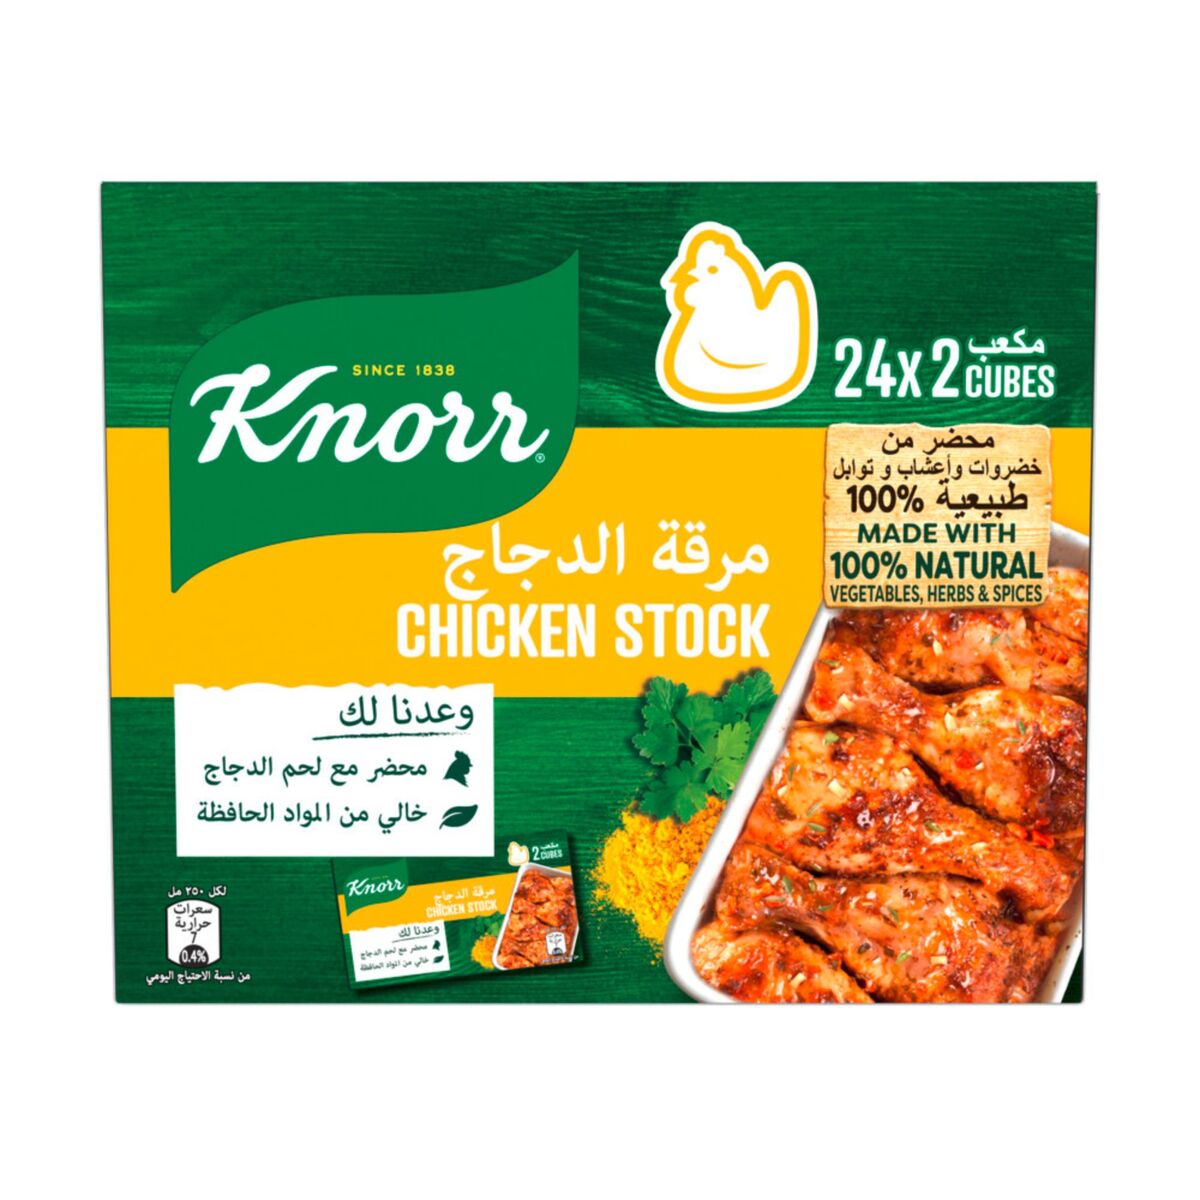 Knorr Chicken Stock Cube 24 x 20 g